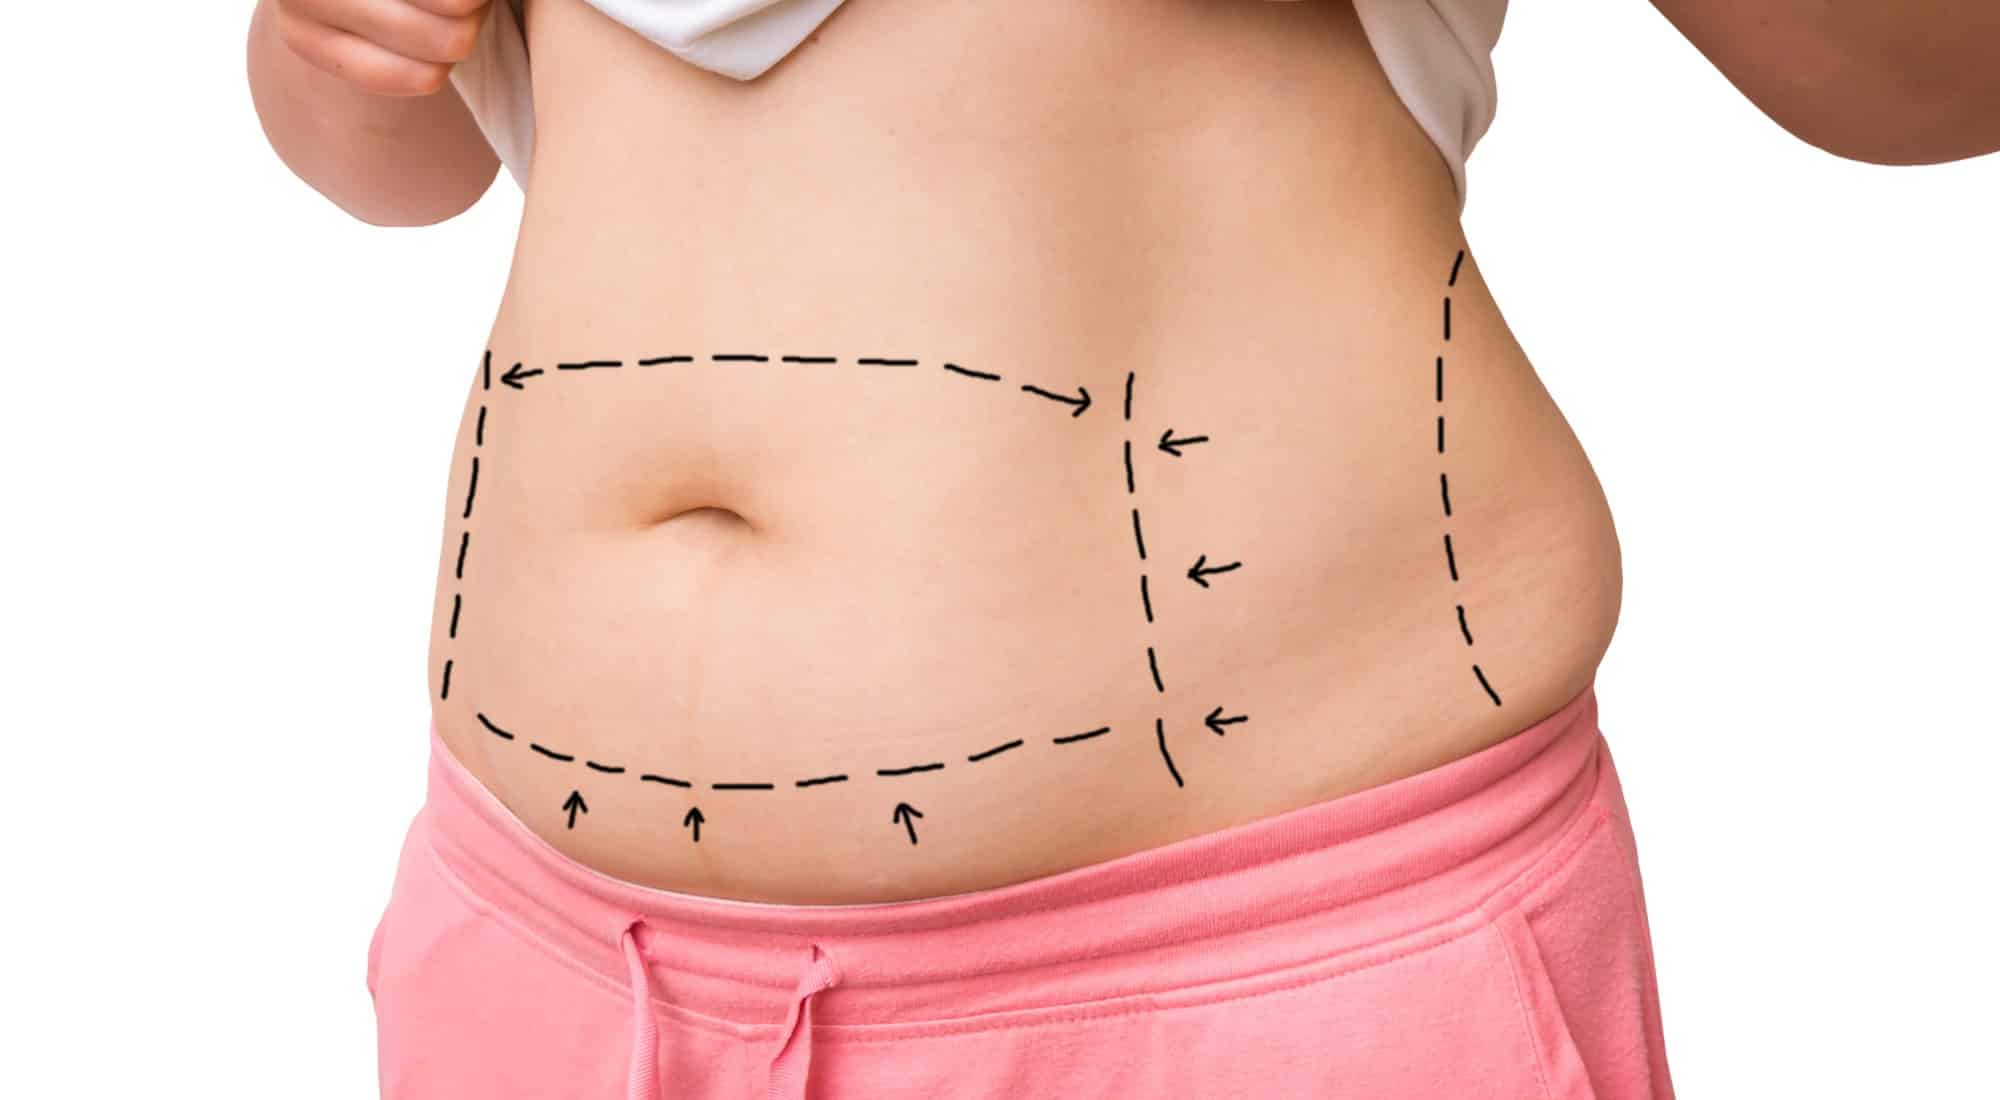 How long is healing after tummy tuck? - Power Plastic Surgery